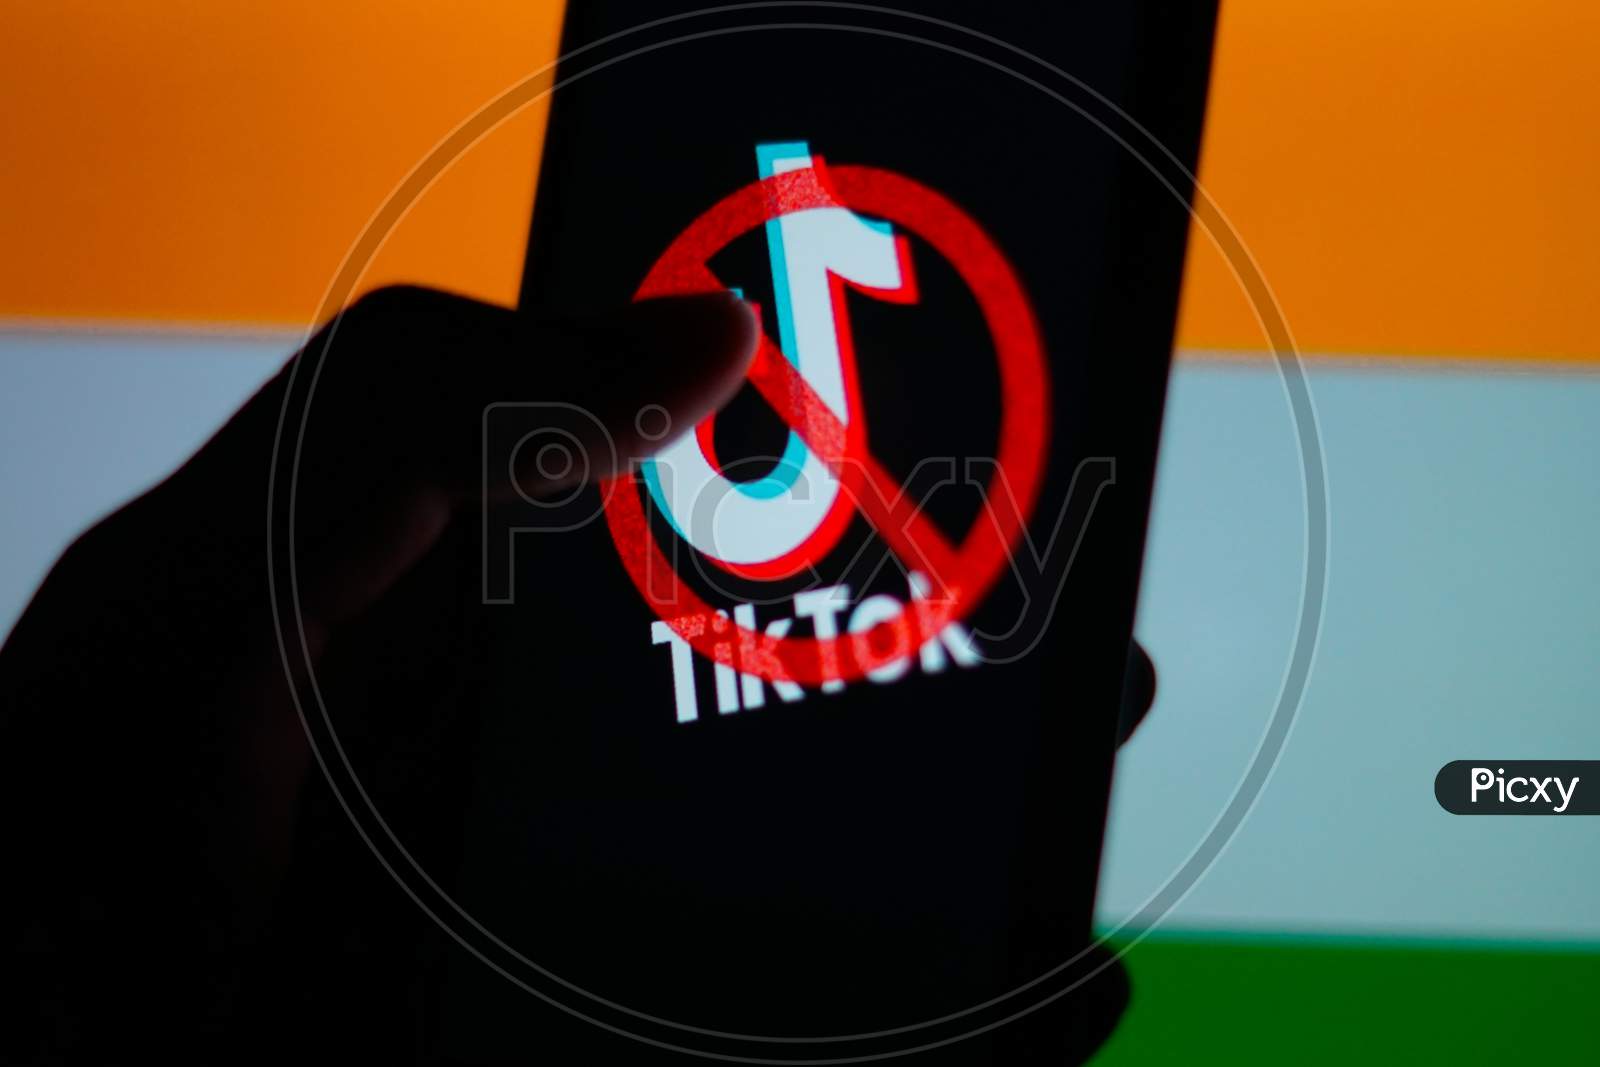 Tiktok Application Logo On A Mobile Screen and a finger about to touch with Indian Flag in the background